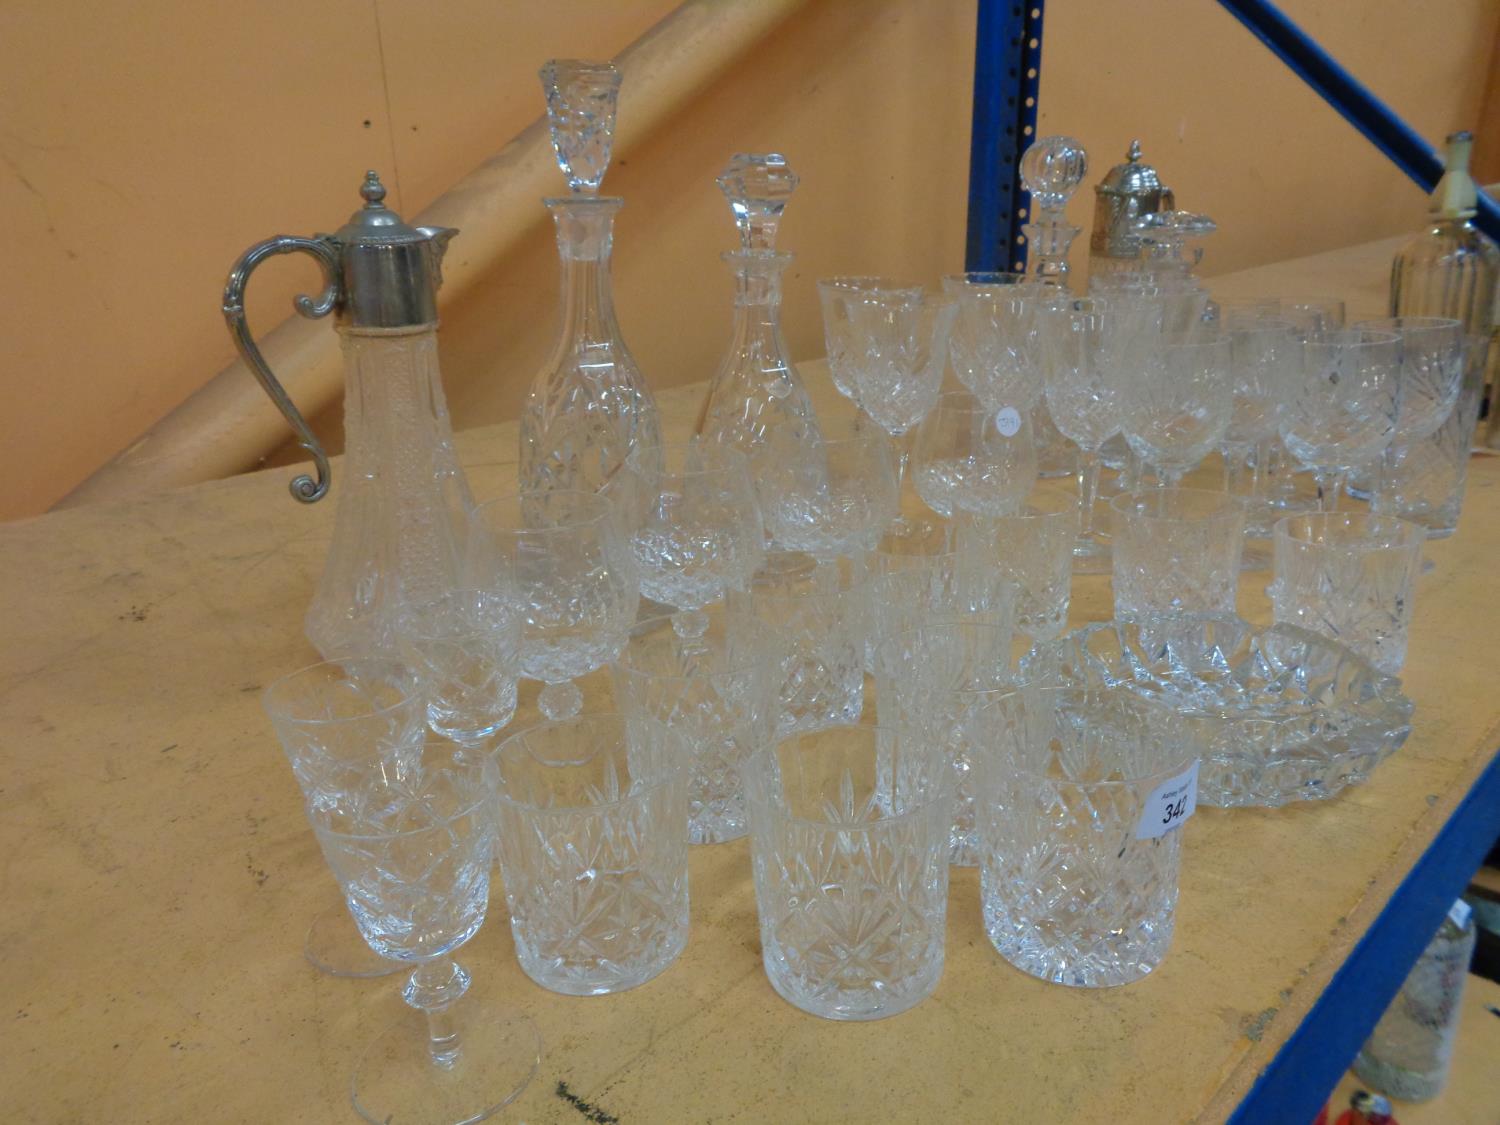 A LARGE COLLECTION OF GLASSWARE INCLUDING DECANTERS AND A VARIETY OF DRINKS GLASSES - Bild 4 aus 8